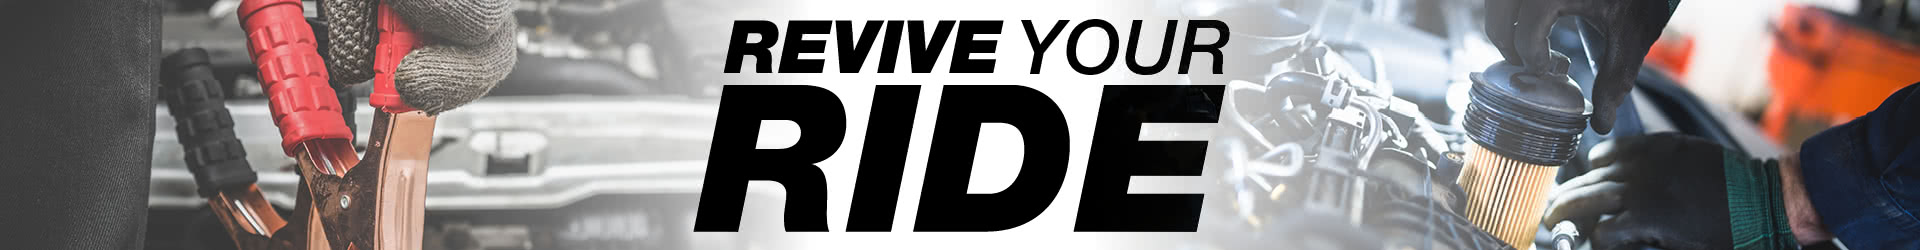 Revive Your Ride Header Image